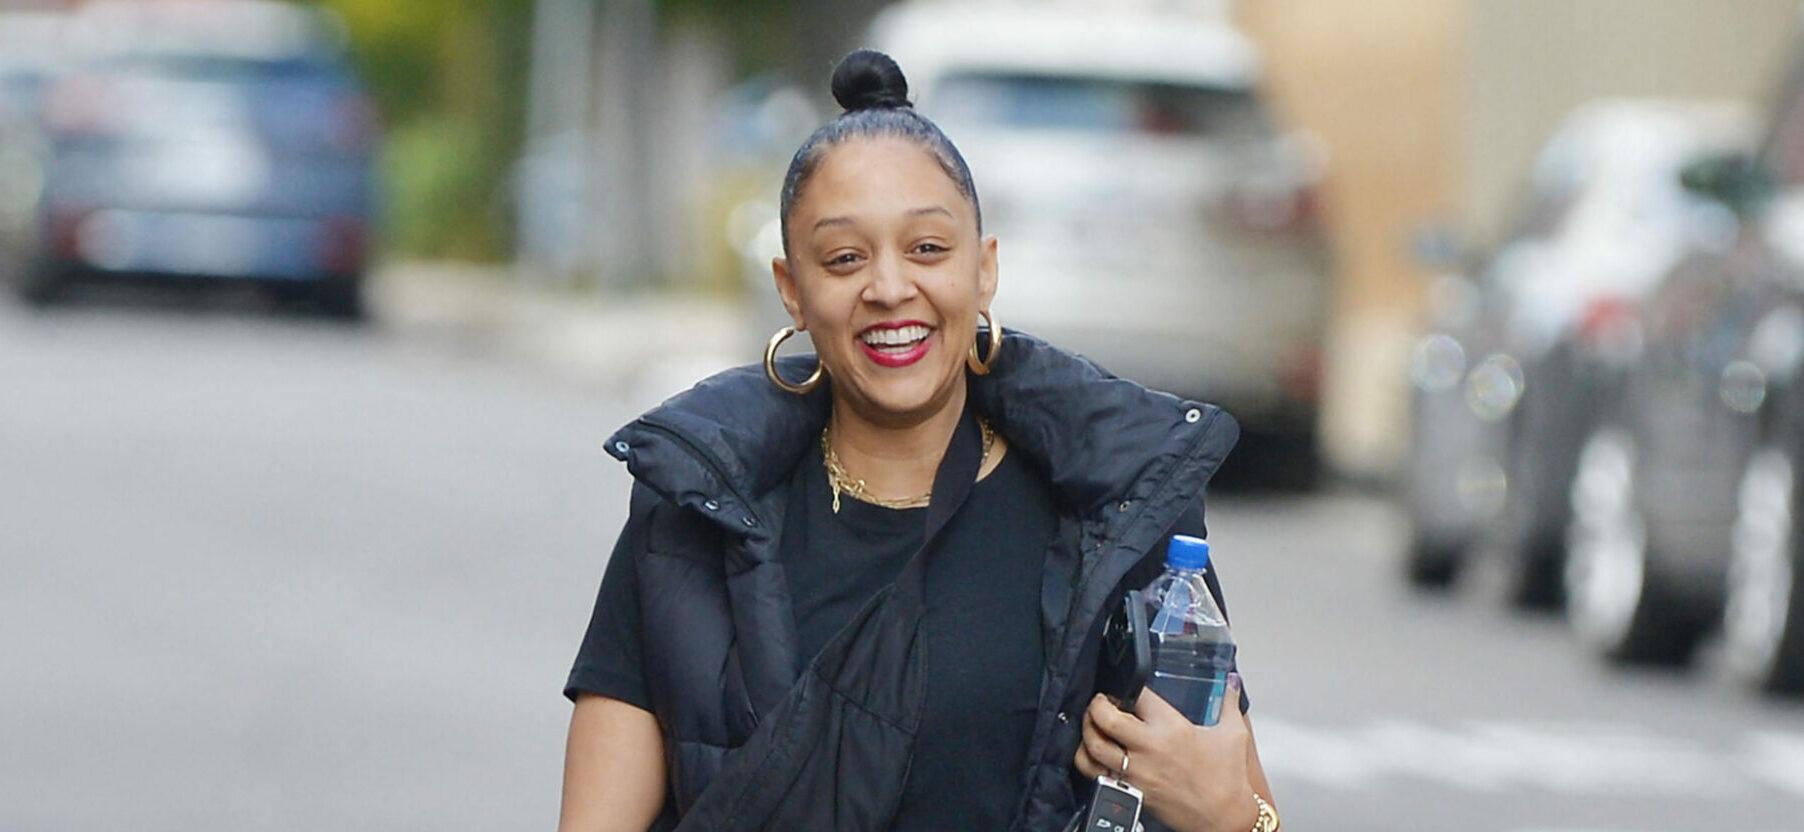 Tia Mowry is all smiles while hitting the gym in L.A.